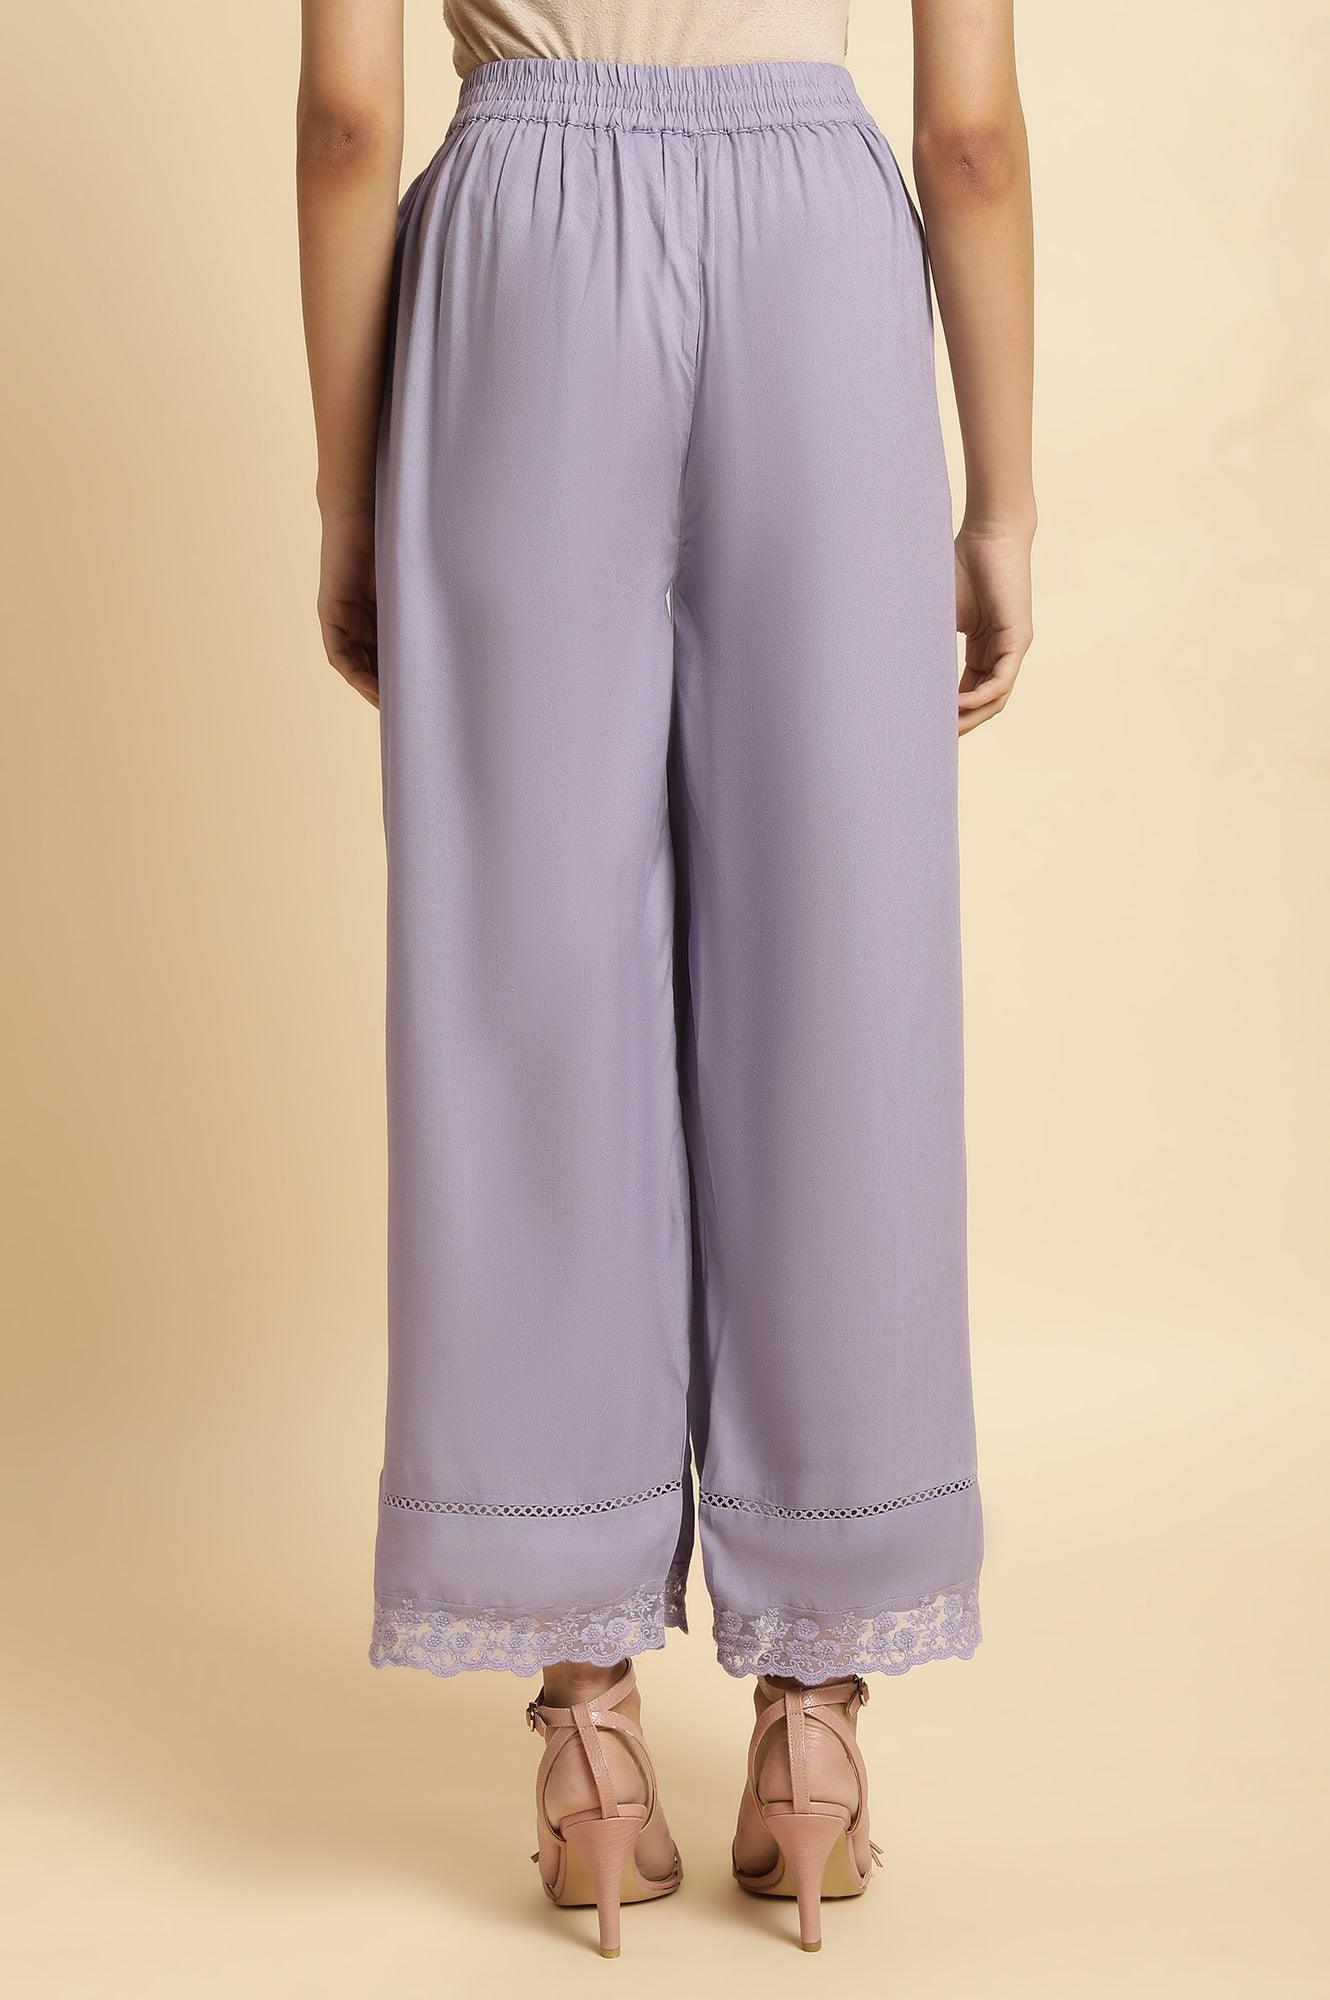 Purple Parallel Pants With Lace At Hemline - wforwoman